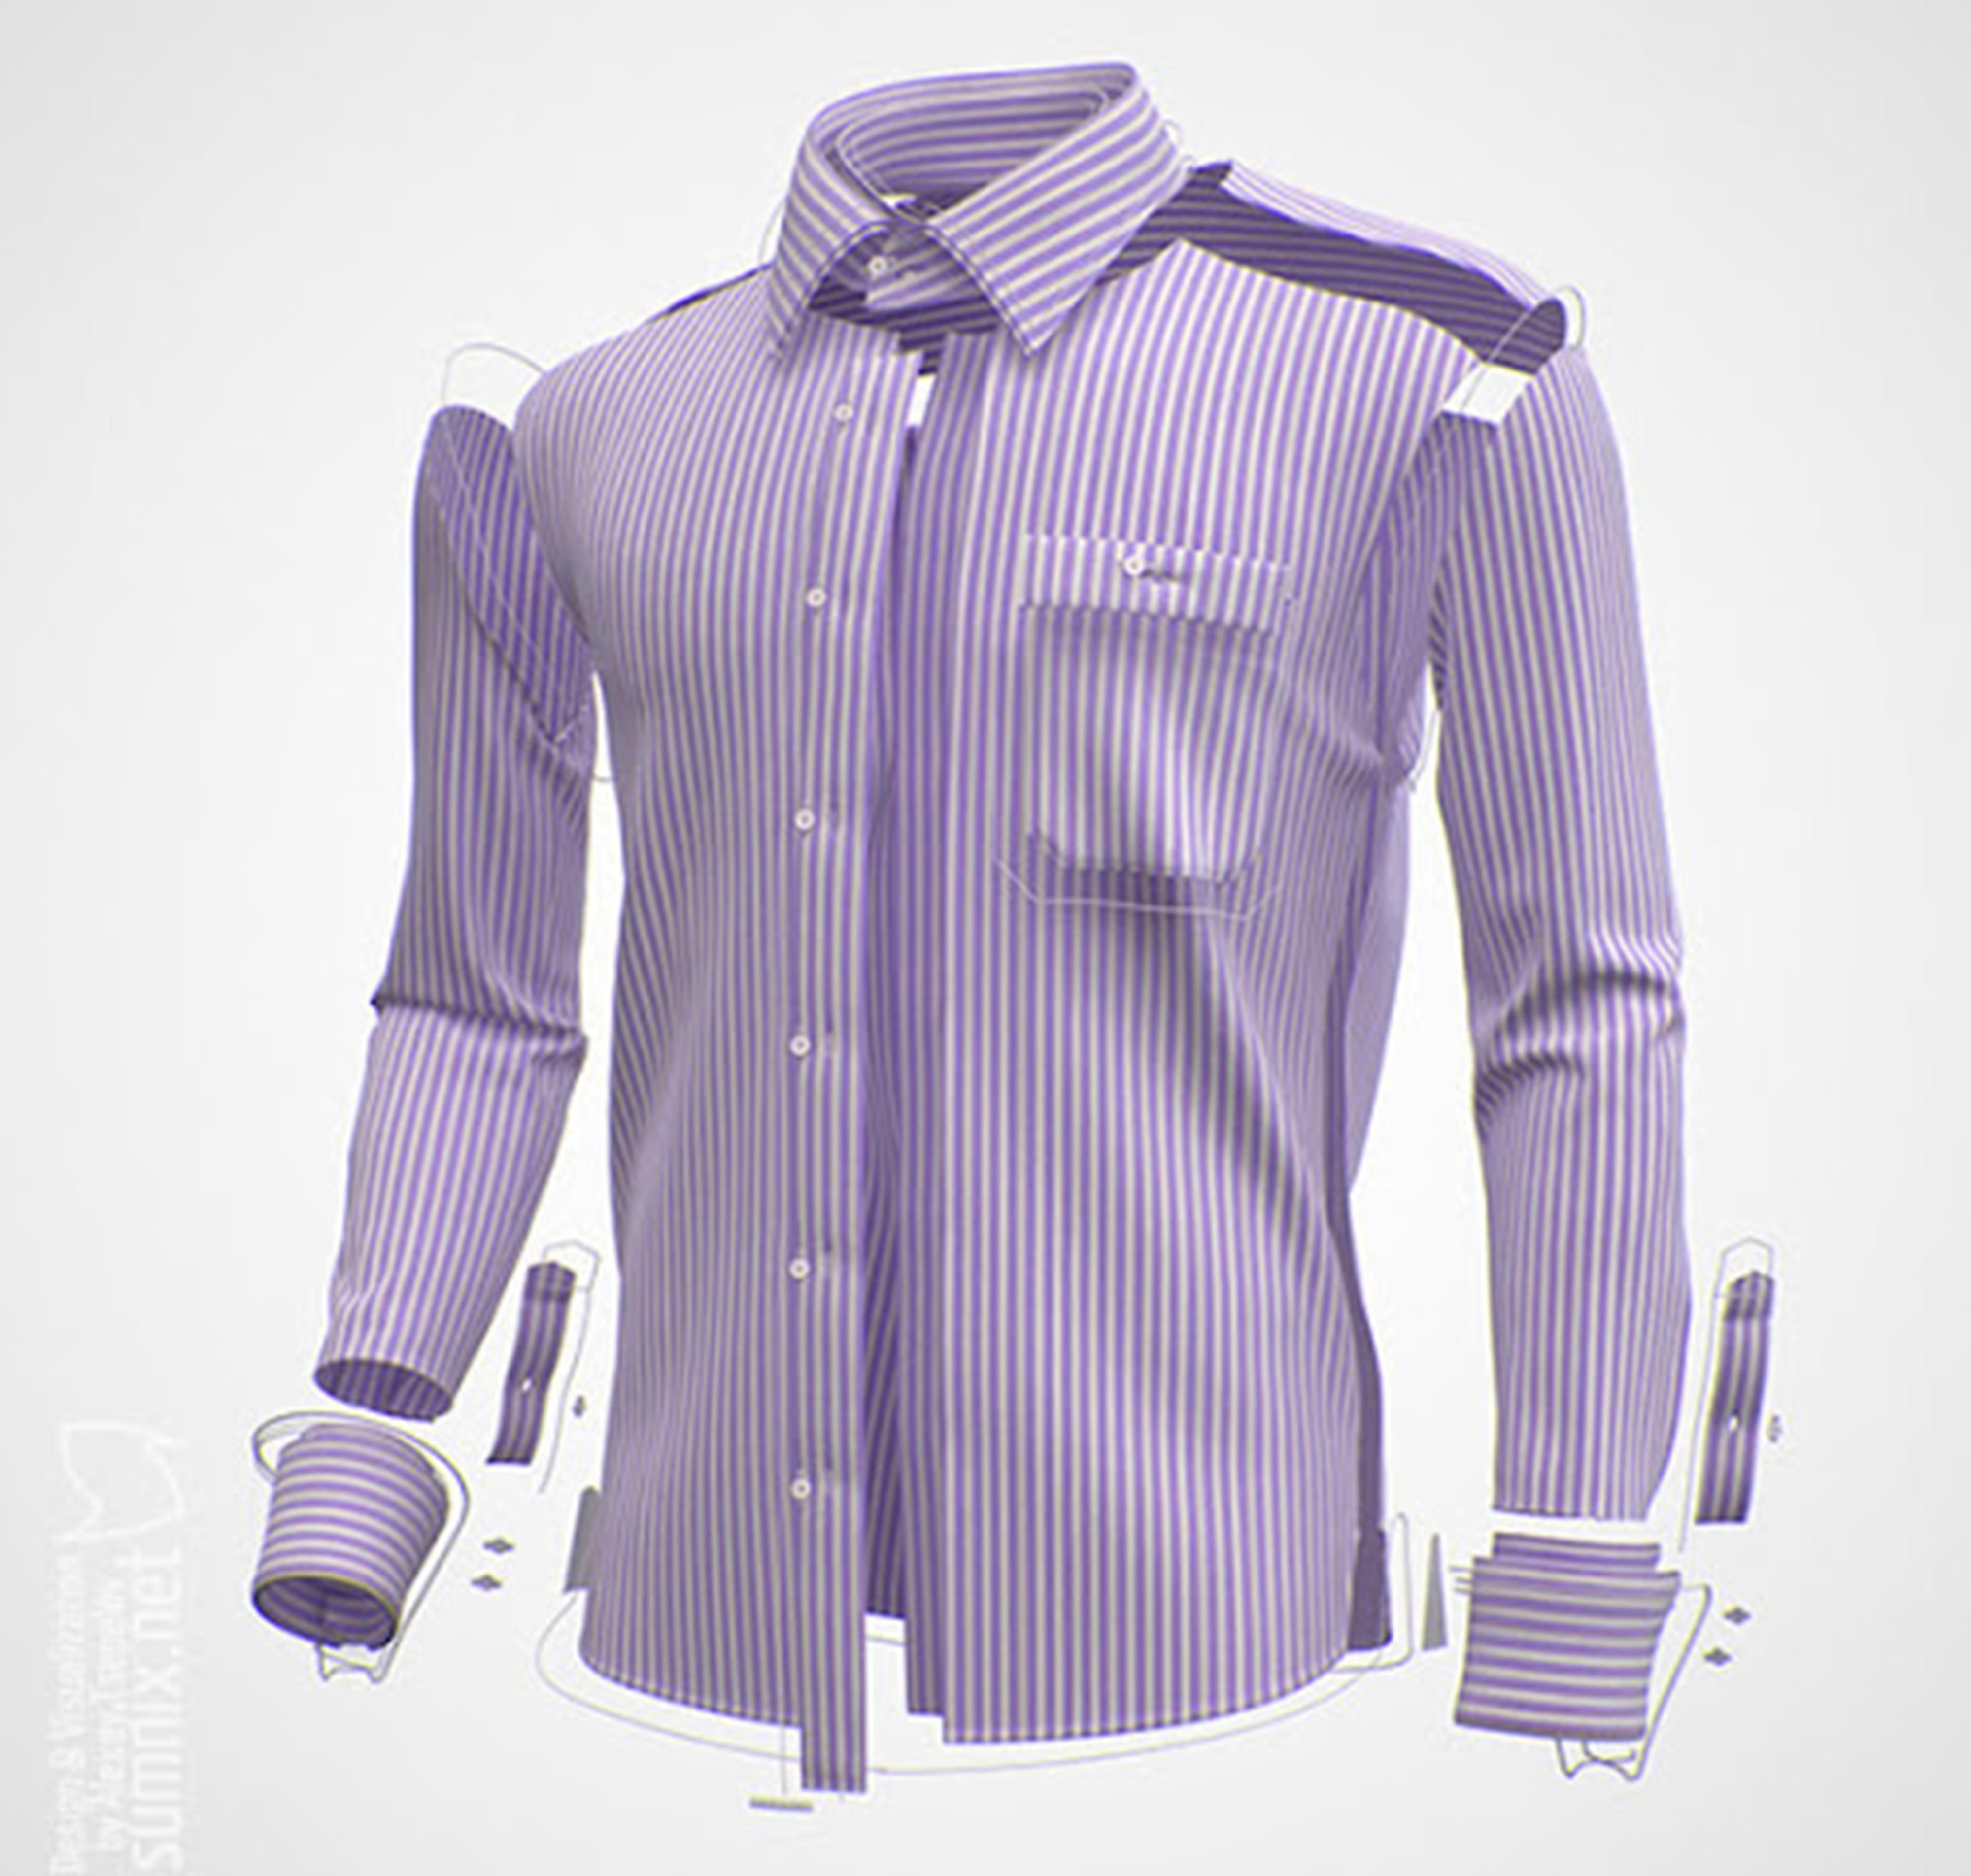 3D visualization of a tailored purple and white striped shirt.